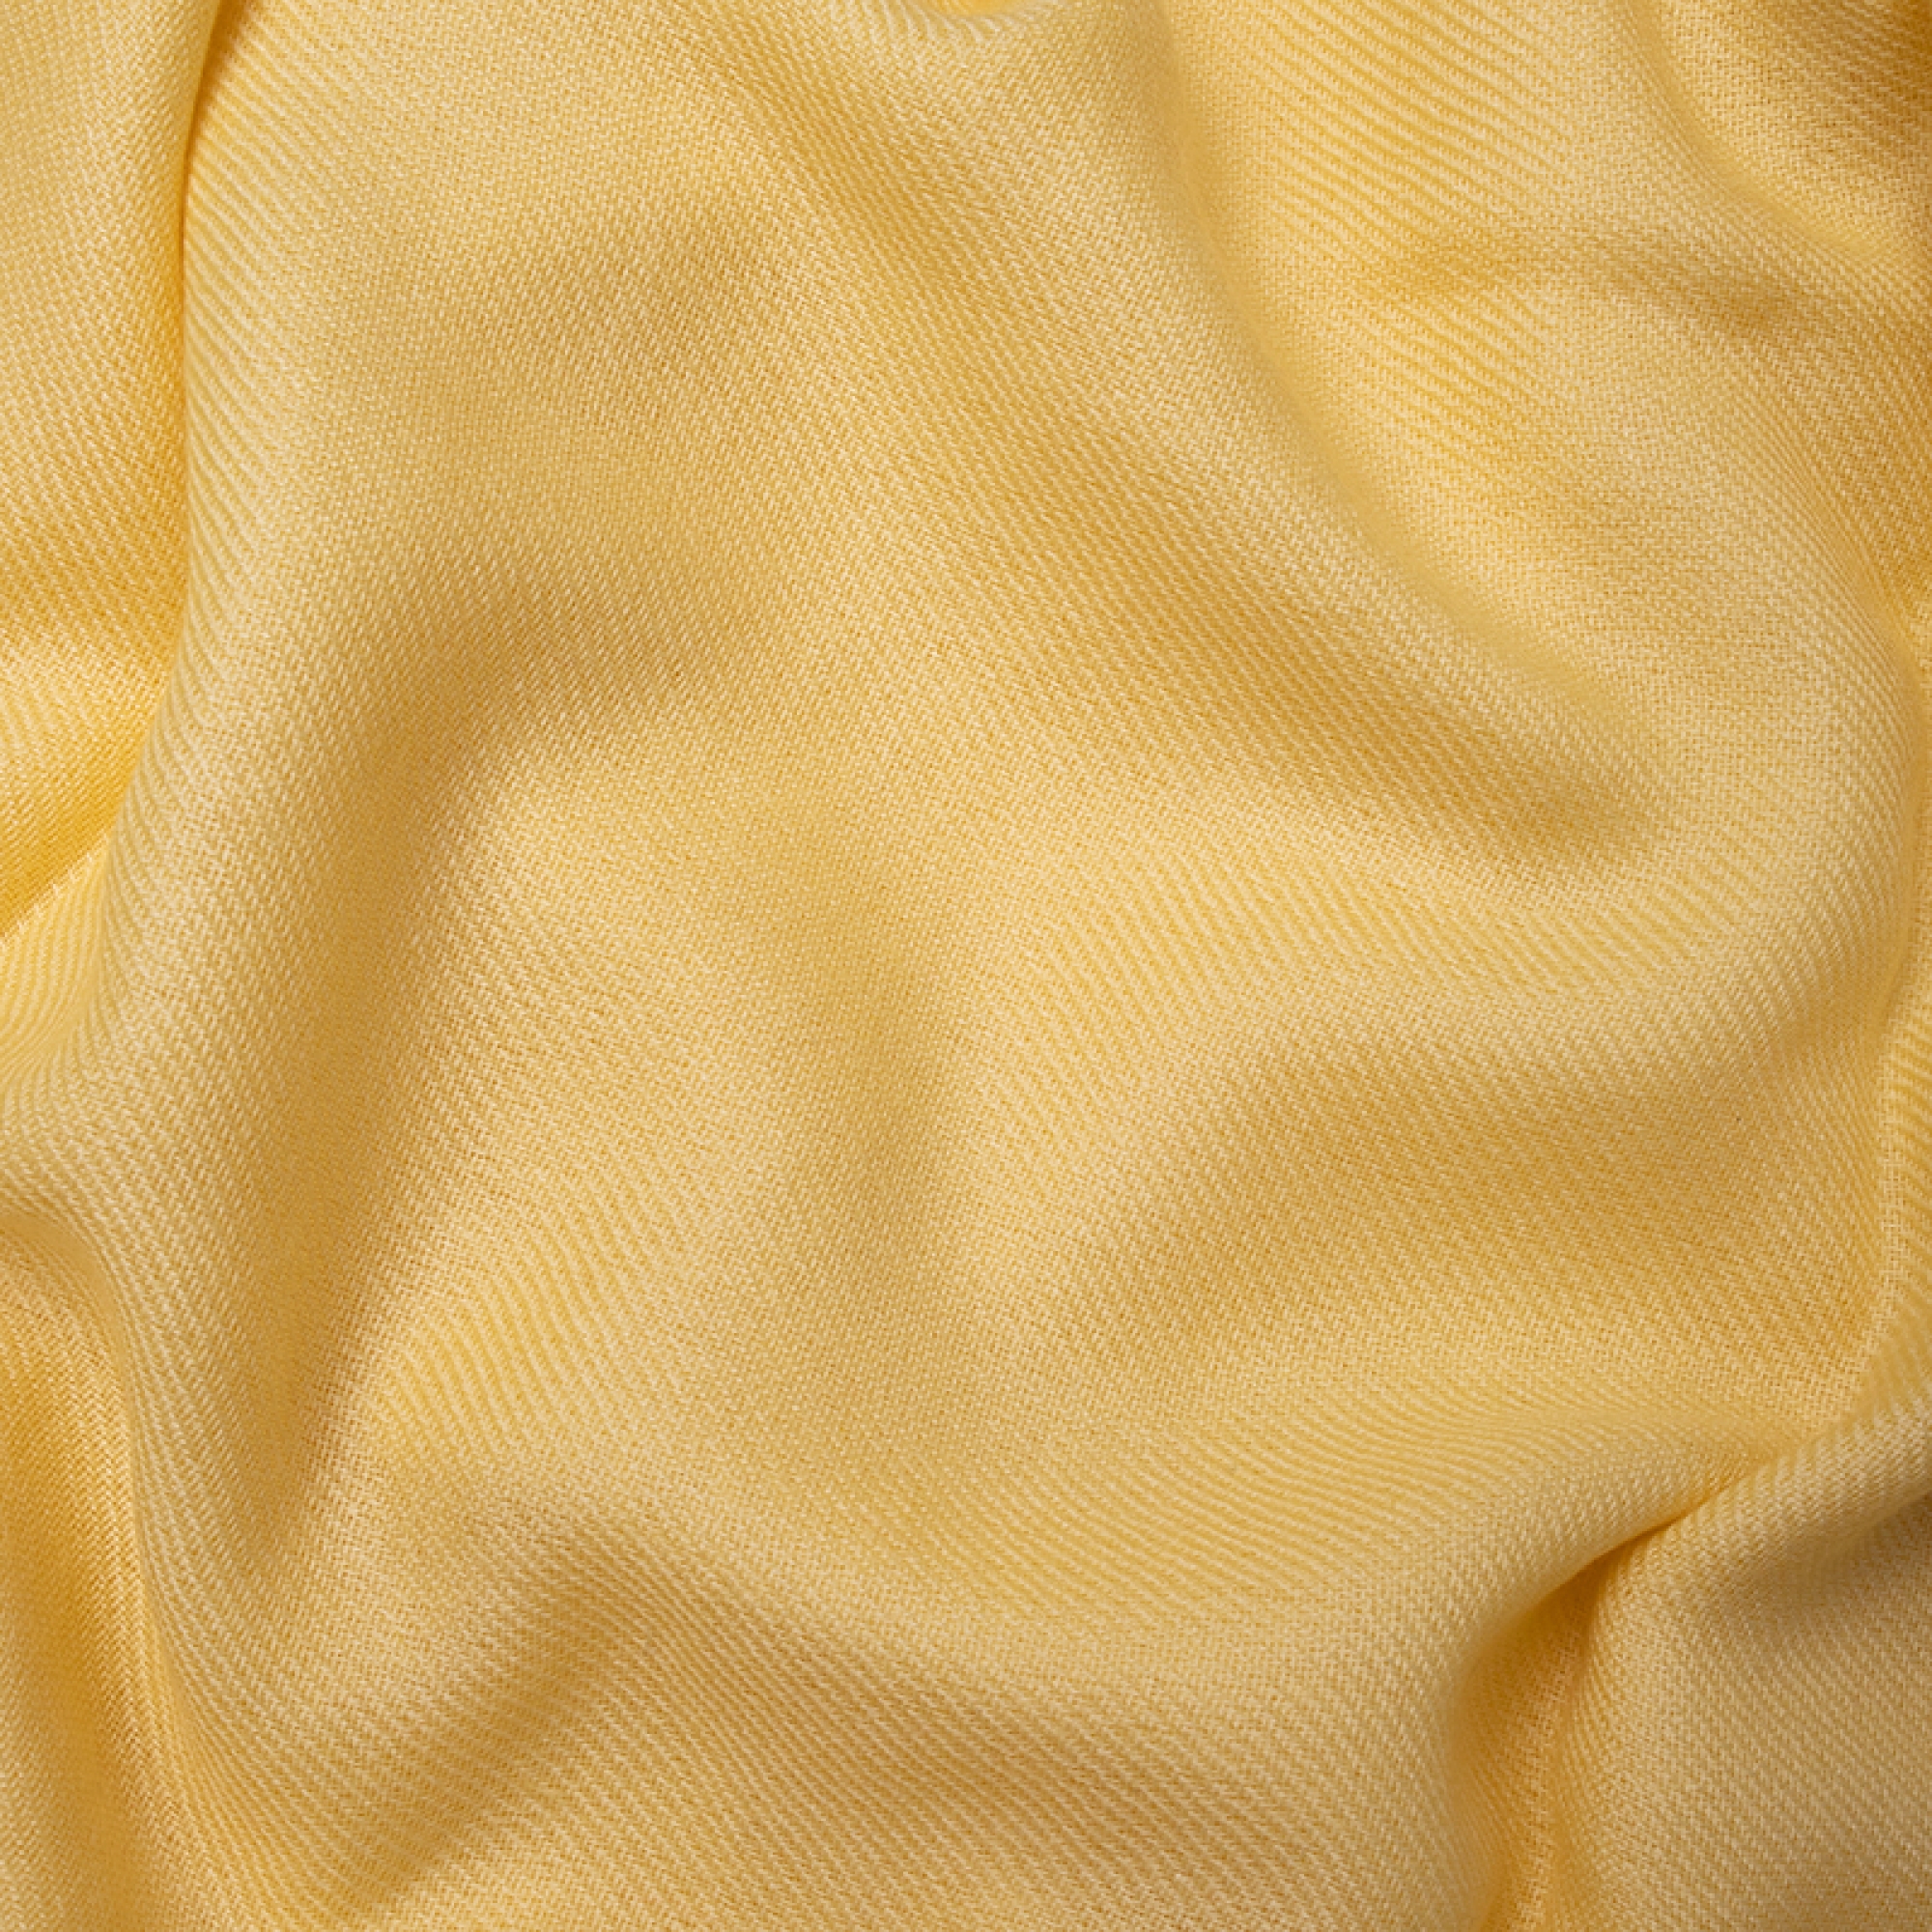 Cashmere accessories cocooning toodoo plain l 220 x 220 mellow yellow 220x220cm